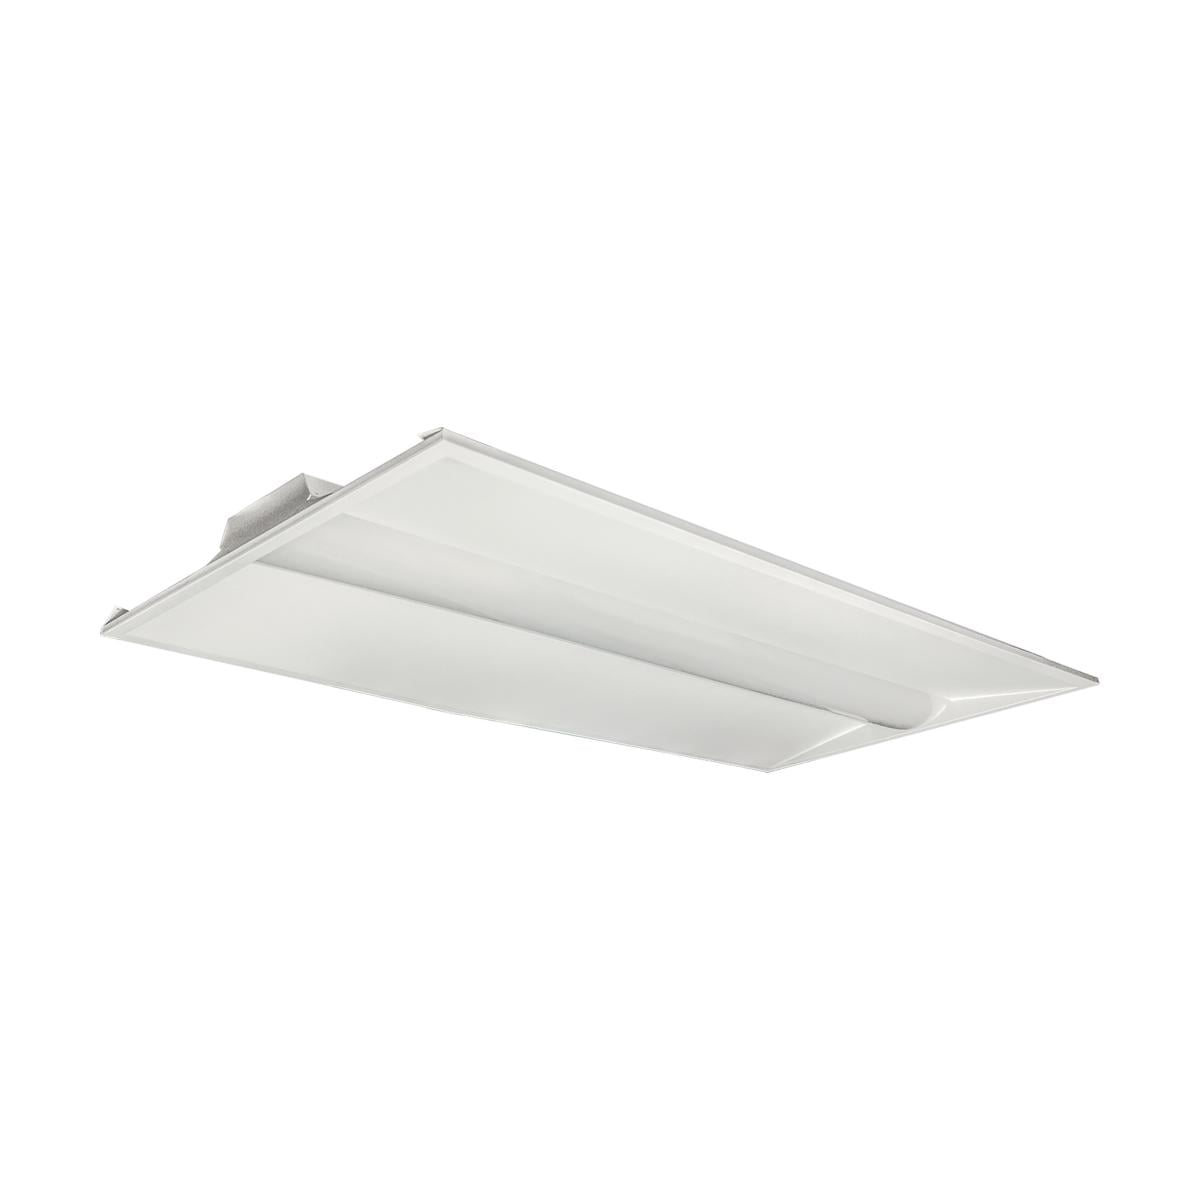 Picture of Satco Nuvo 3008609 47.75 in. T8 125 W LED Troffer Fixture